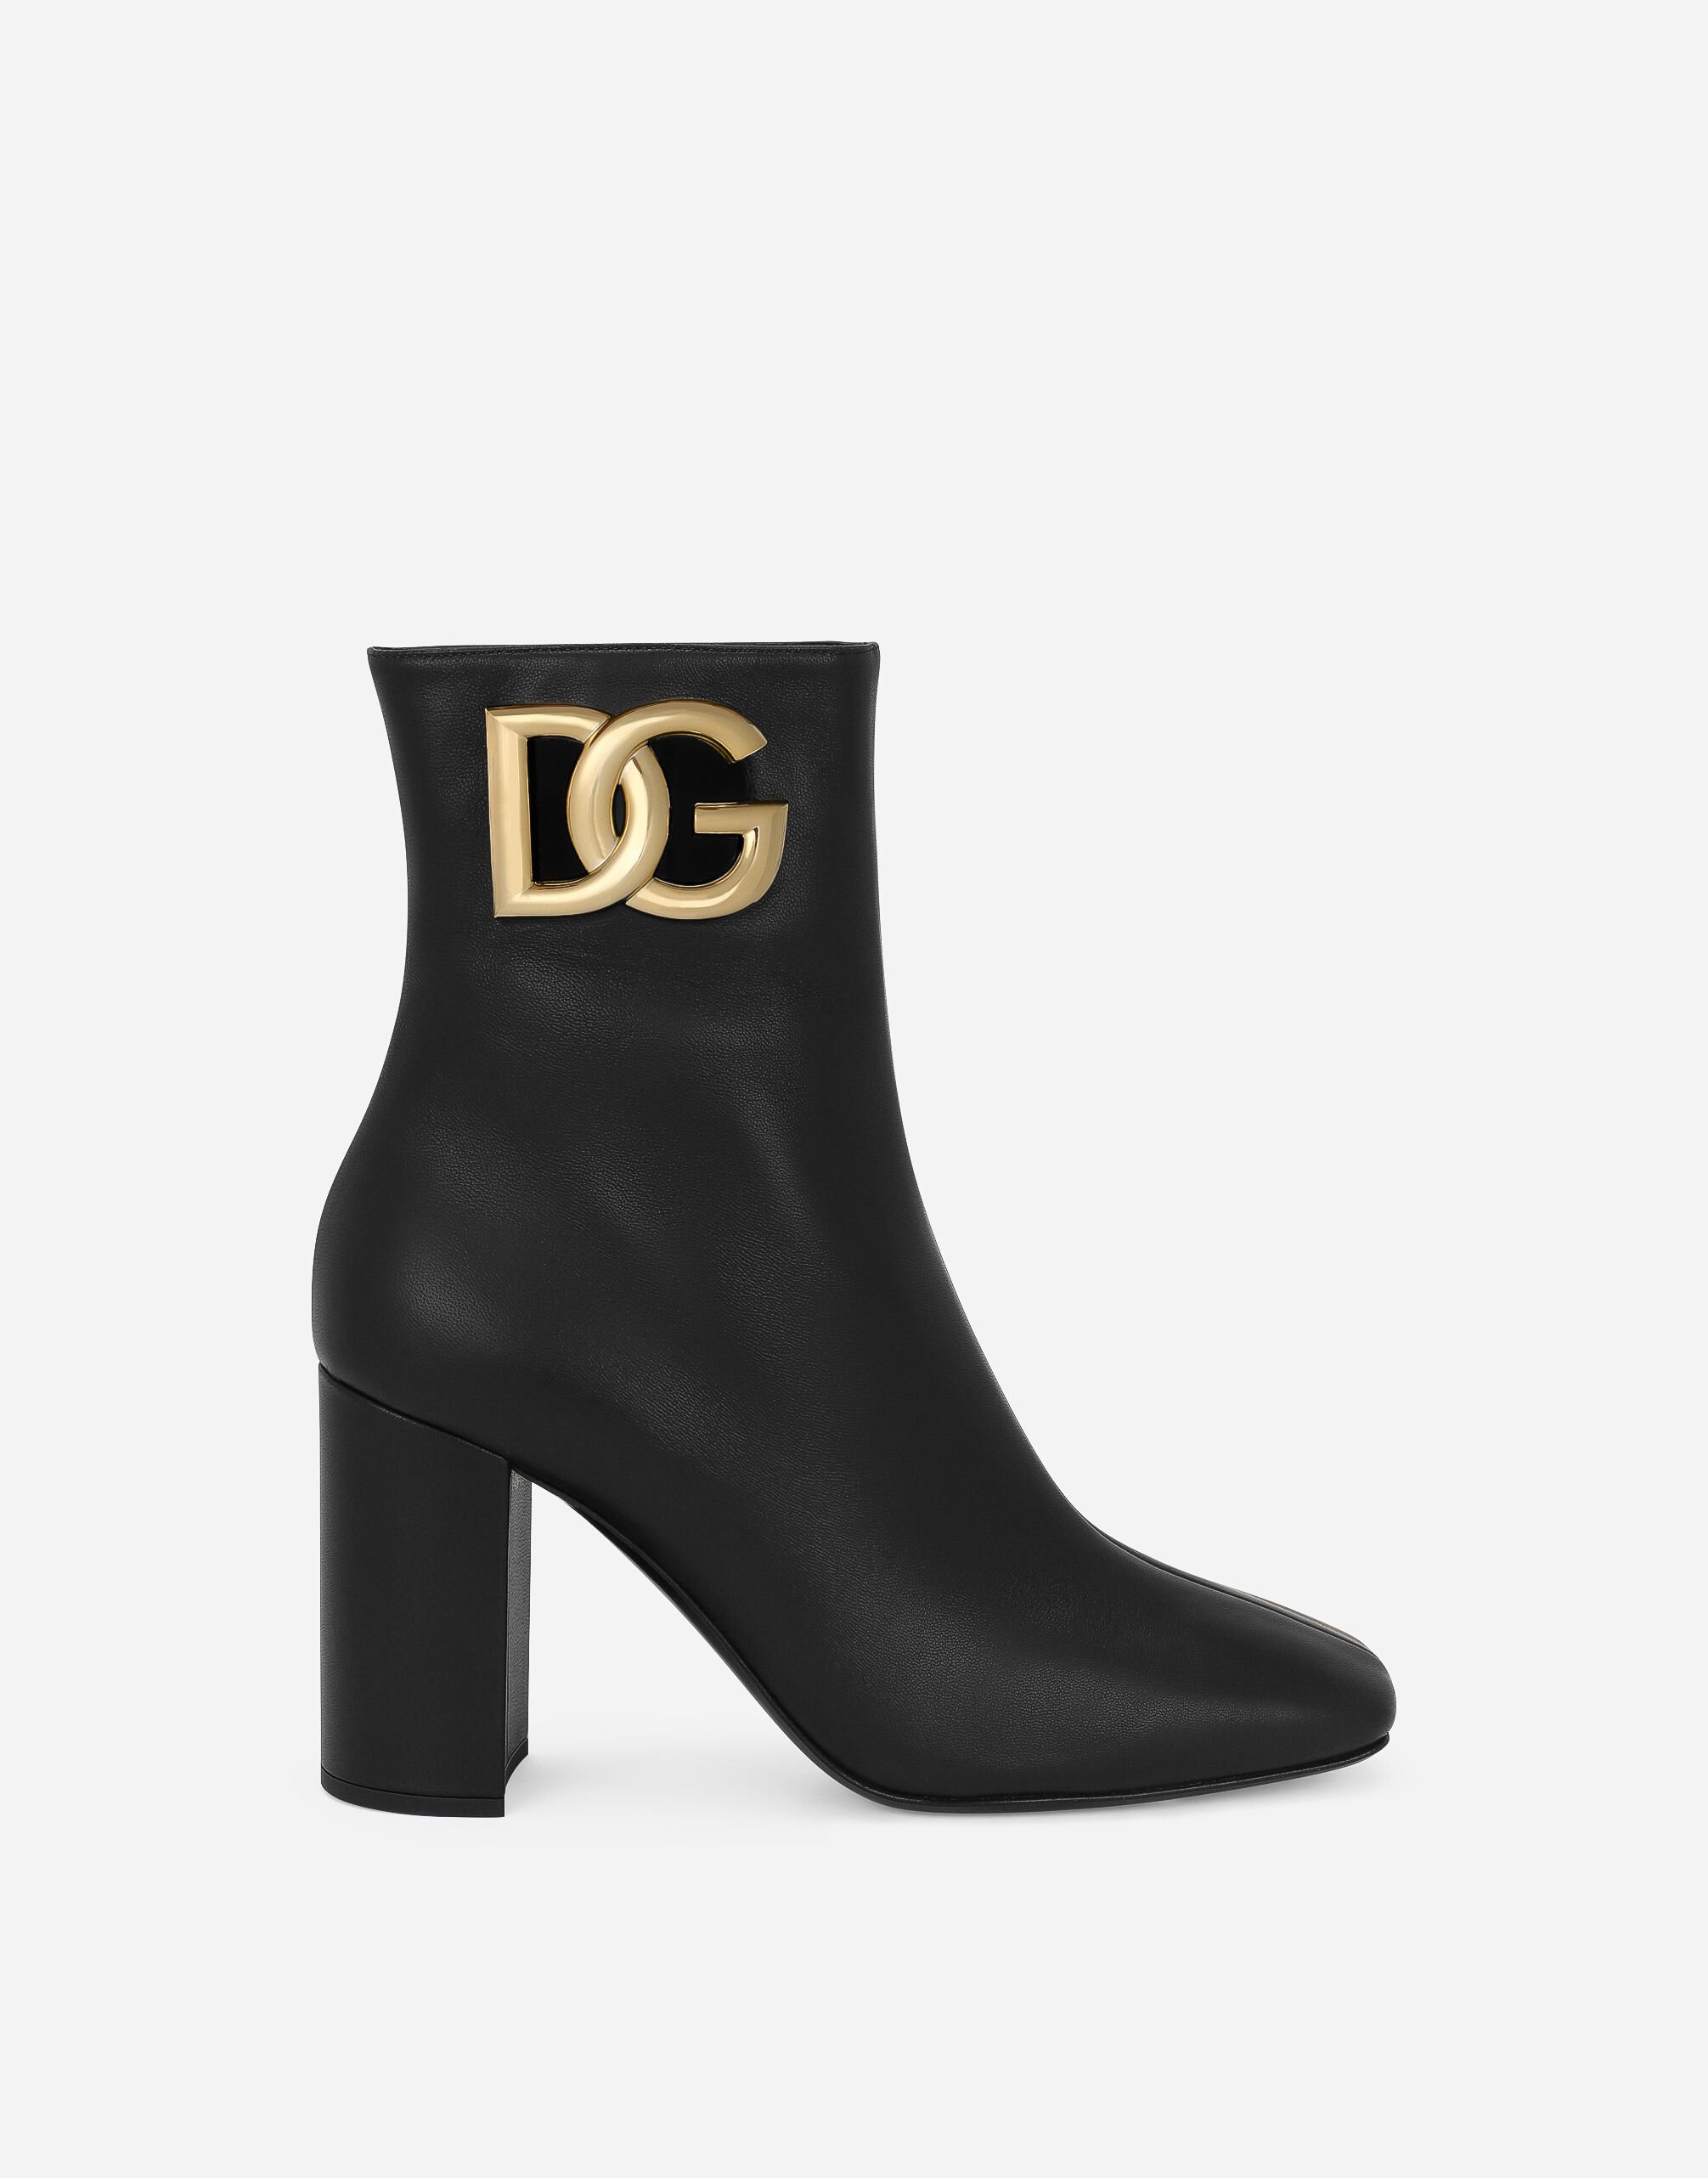 Women's boots and booties: heeled, combat, ankle | D&G®